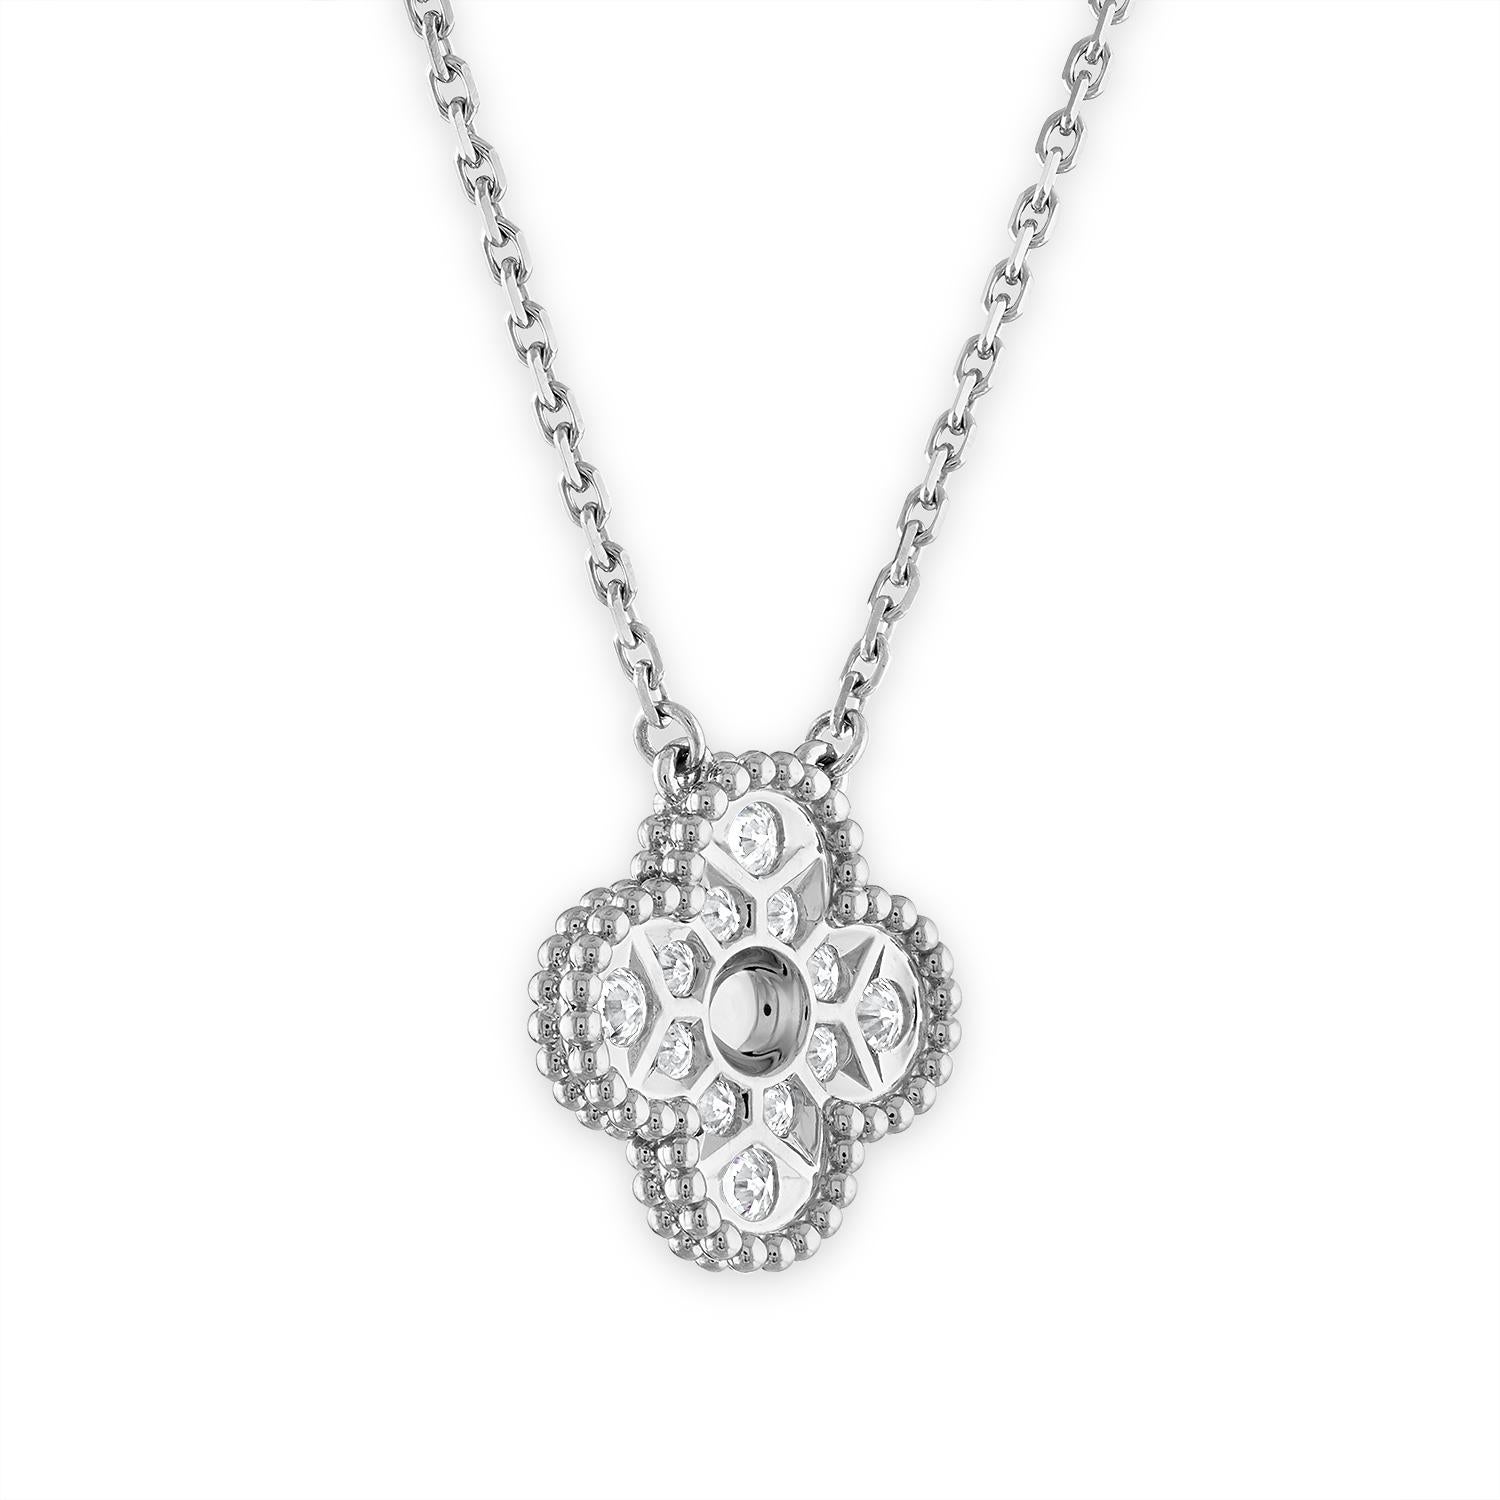 Diamond pendant necklace from Vintage Alhambra collection. A simple and classic must-have piece in the closet.

Maker: Van Cleef & Arpels

Accessories: Boxes, the original certificate dated 2022, and the original receipt.

Condition: Like-new